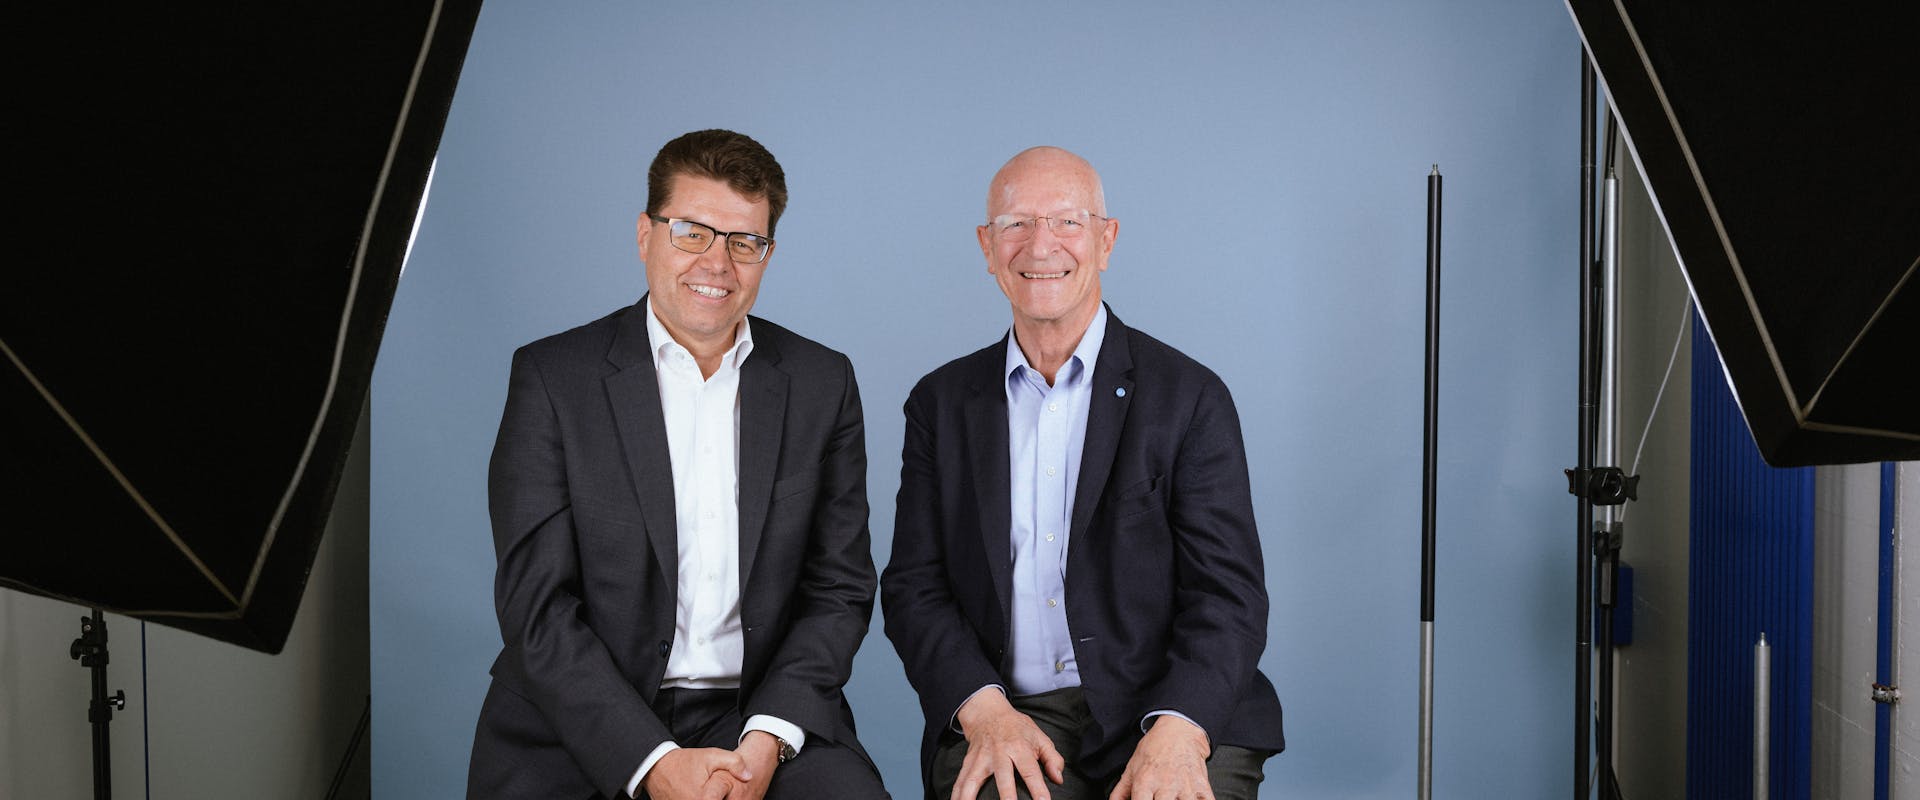 Behind the scenes: Claude Nicollier, outgoing CSEM Chair, hands over the reins to his successor Andreas Rickenbacher.